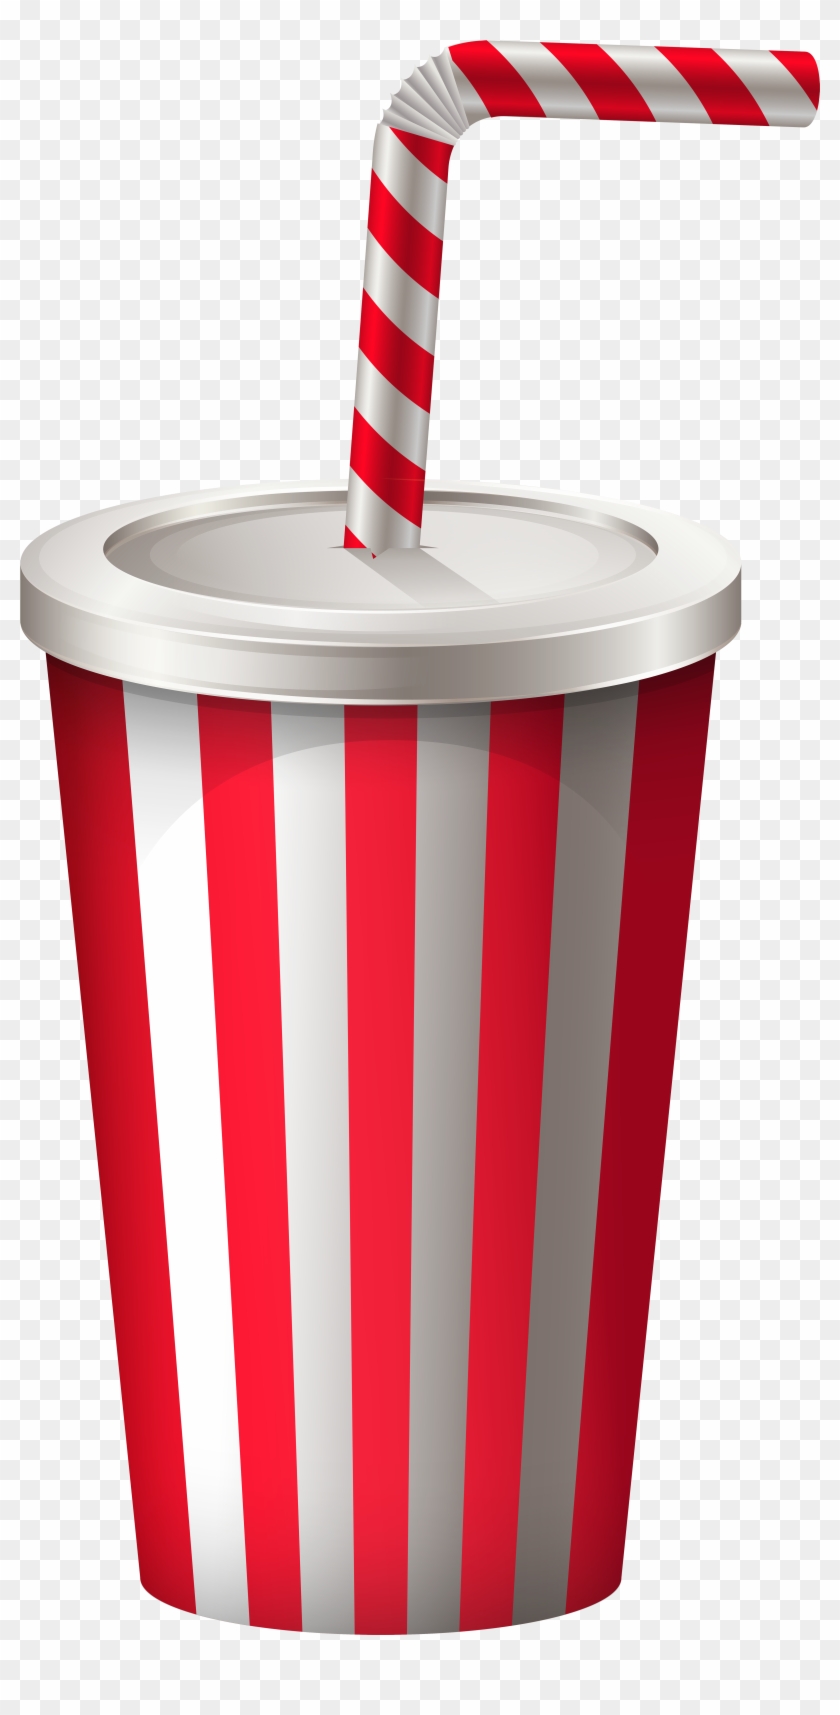 Drink - Soft Drinks With Straw Png #607151